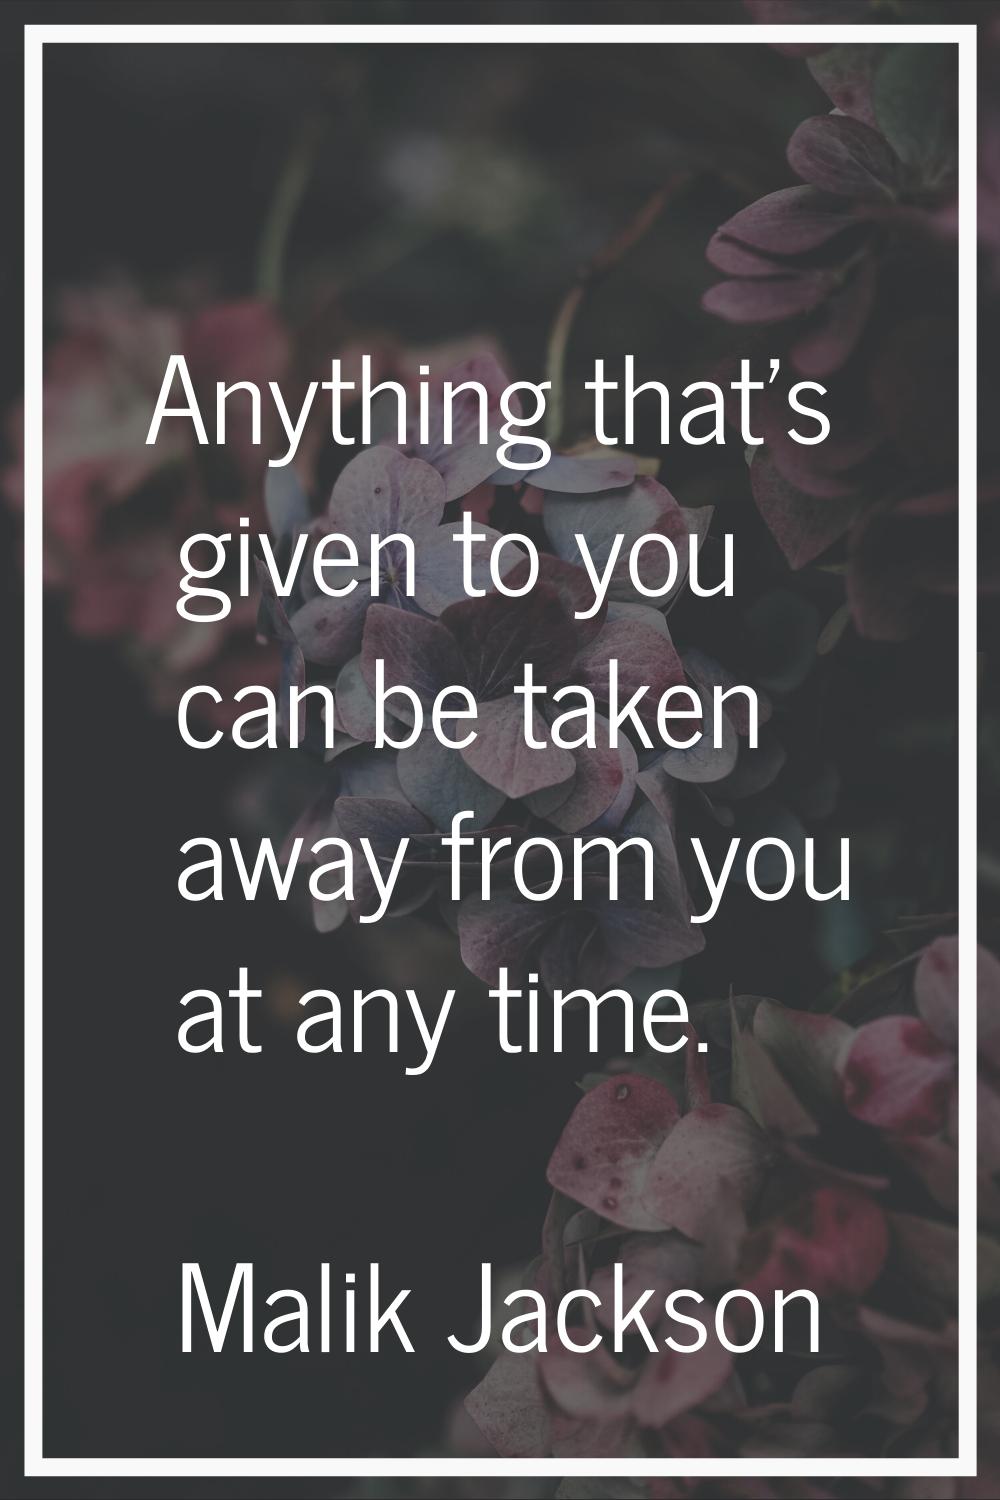 Anything that's given to you can be taken away from you at any time.